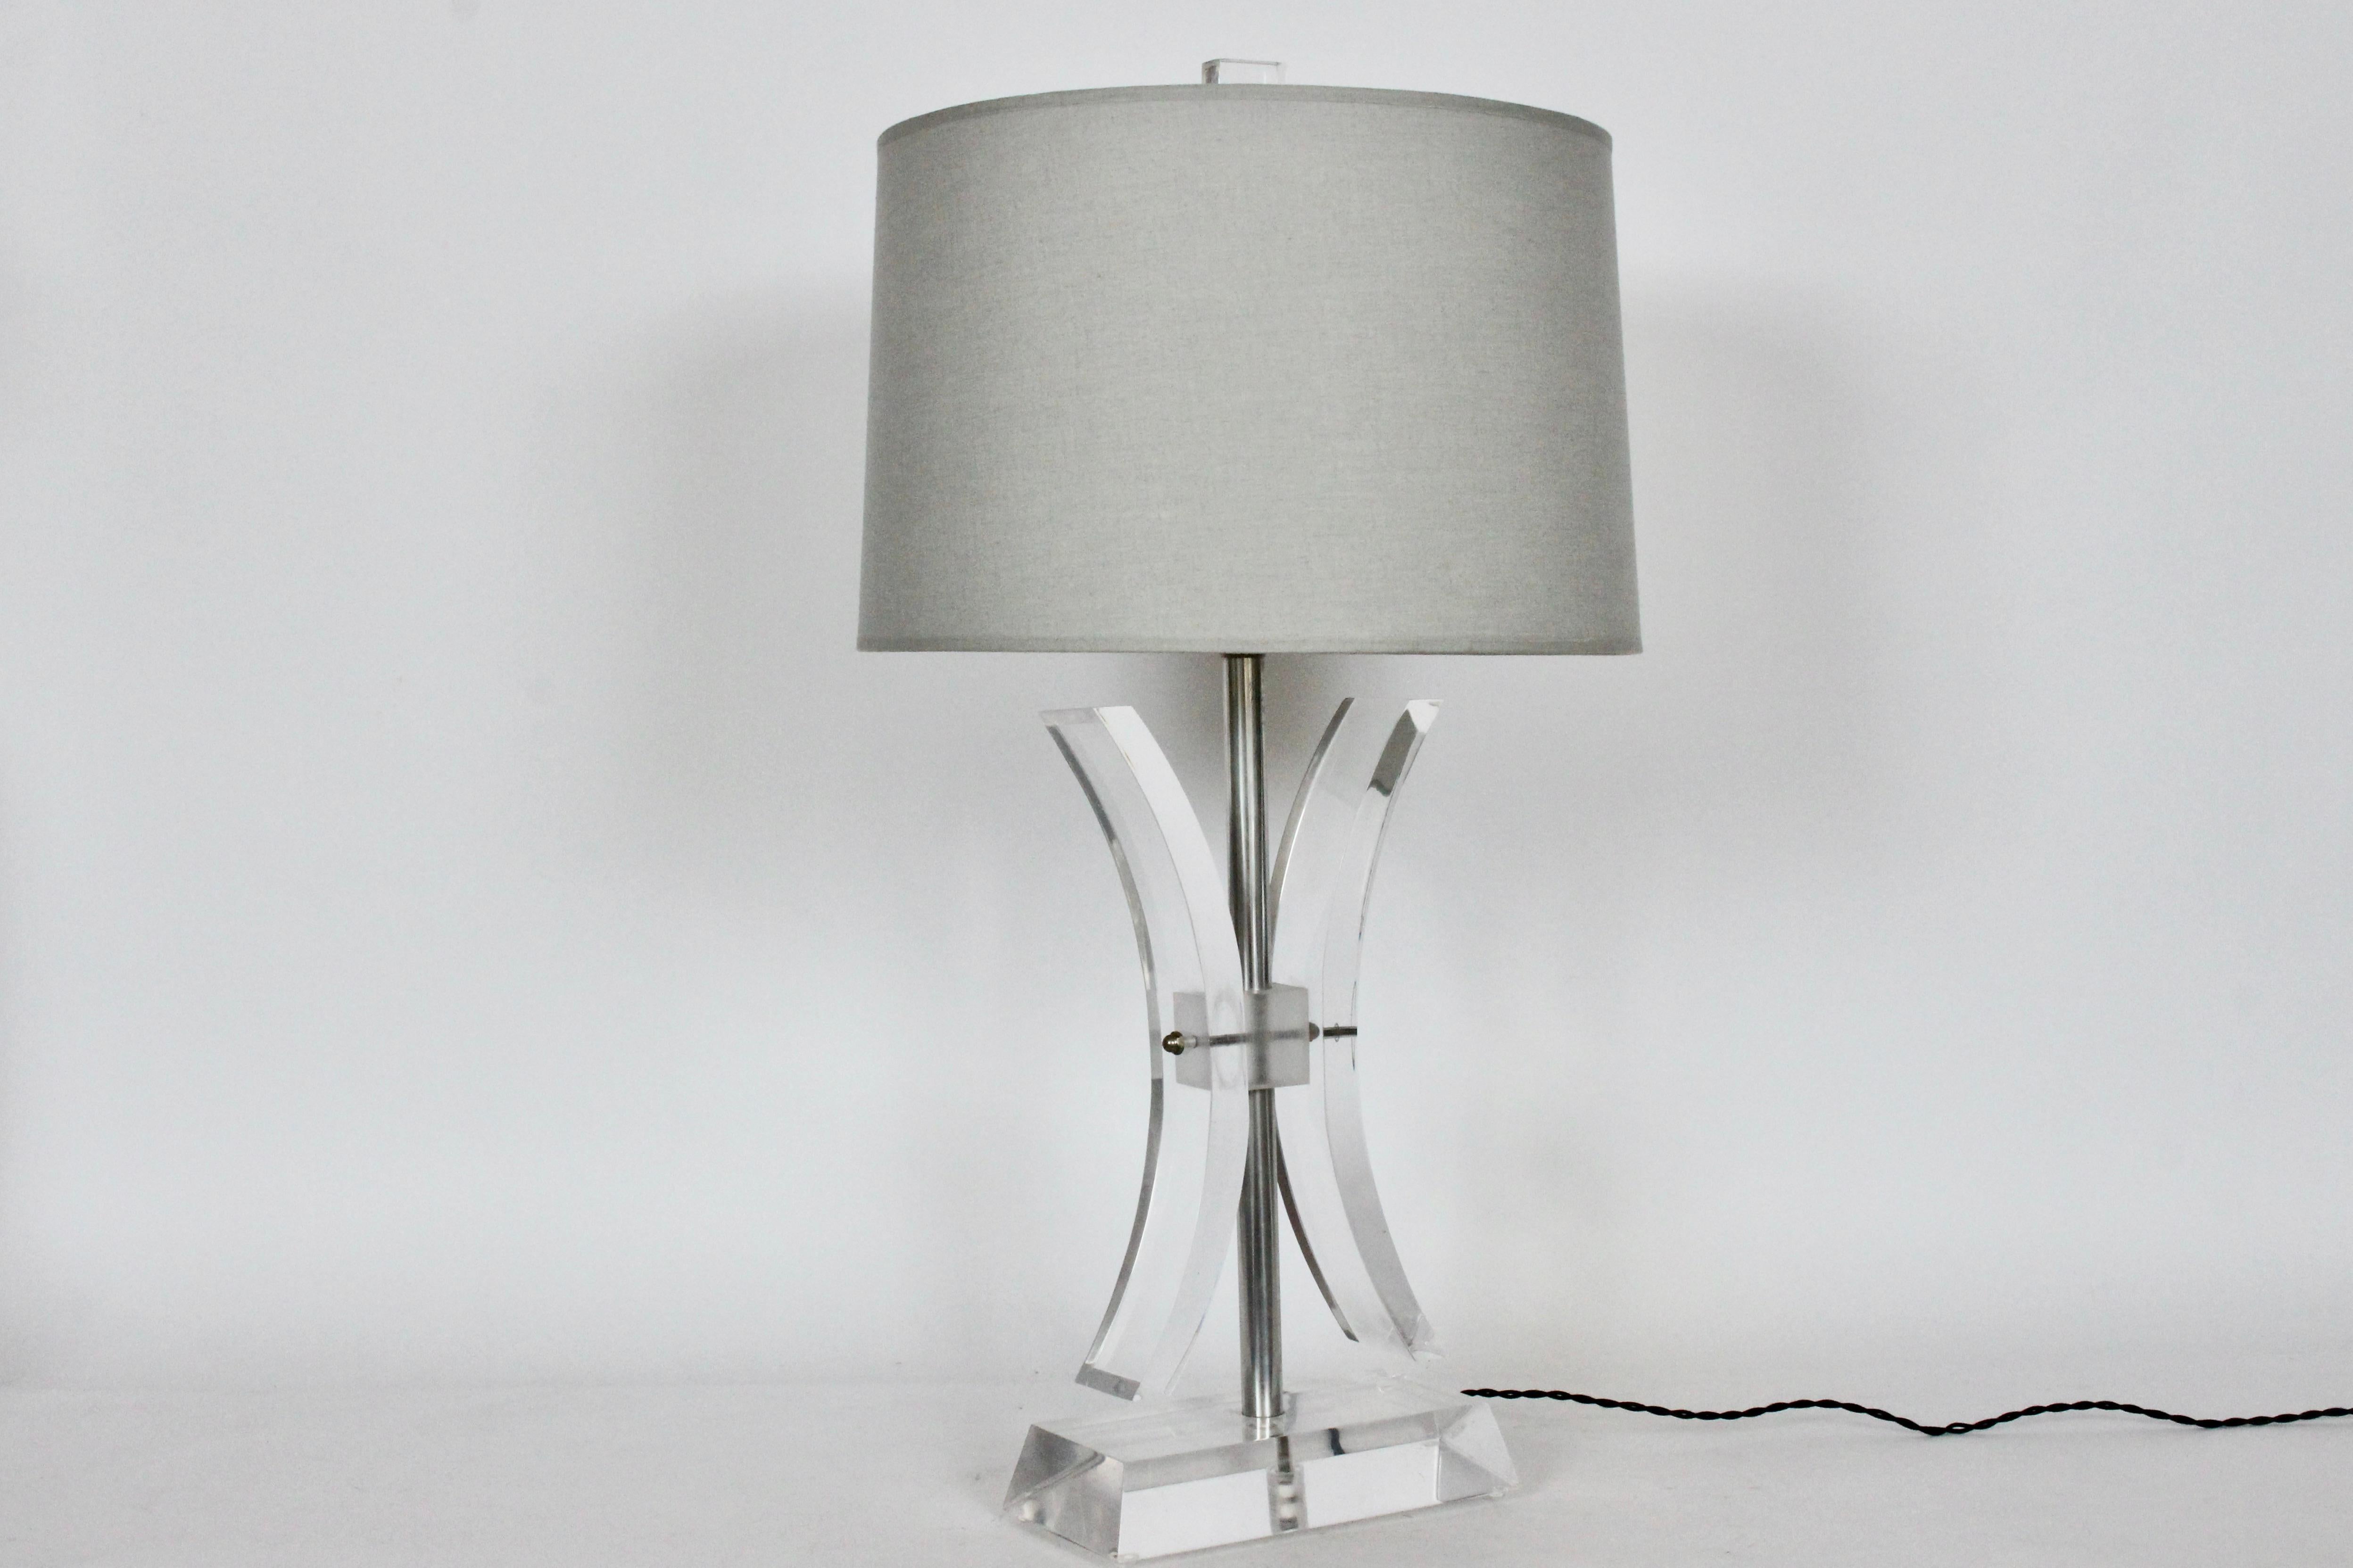 Hollywood Regency Herb Ritts for Astrolite Curved Double Swag Clear Lucite Table Lamp, 1970s For Sale